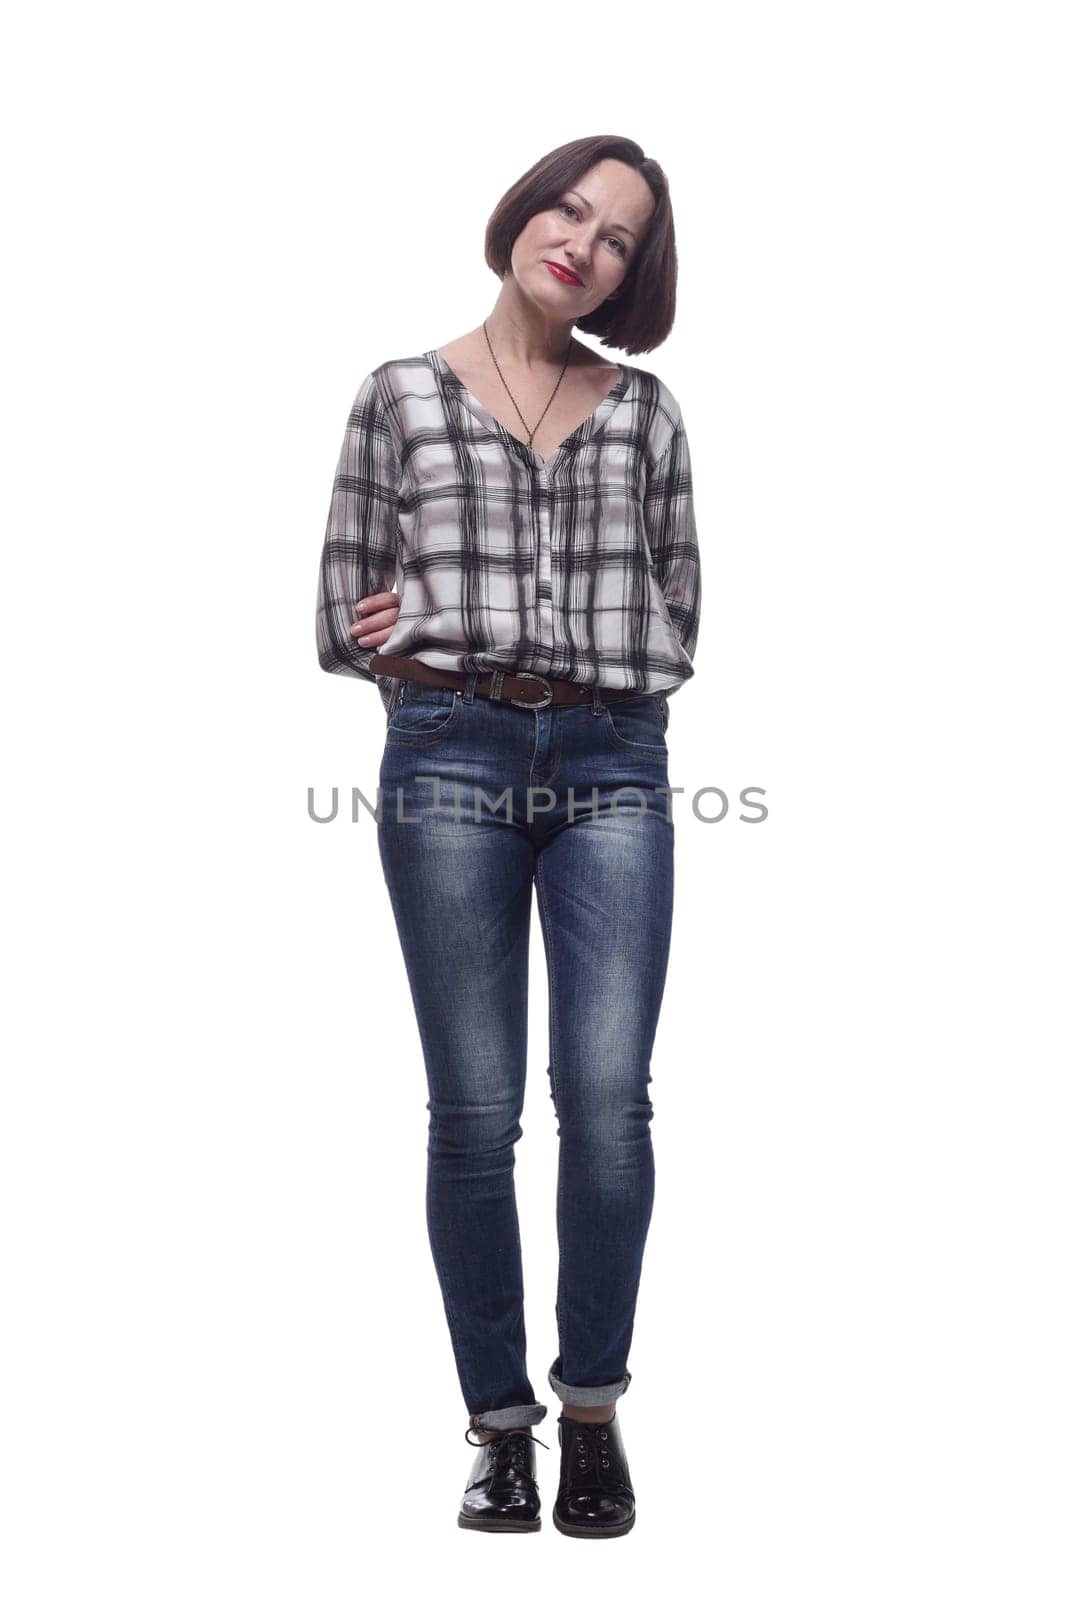 in full growth. attractive mature woman in jeans showing thumbs up . isolated on a white background.